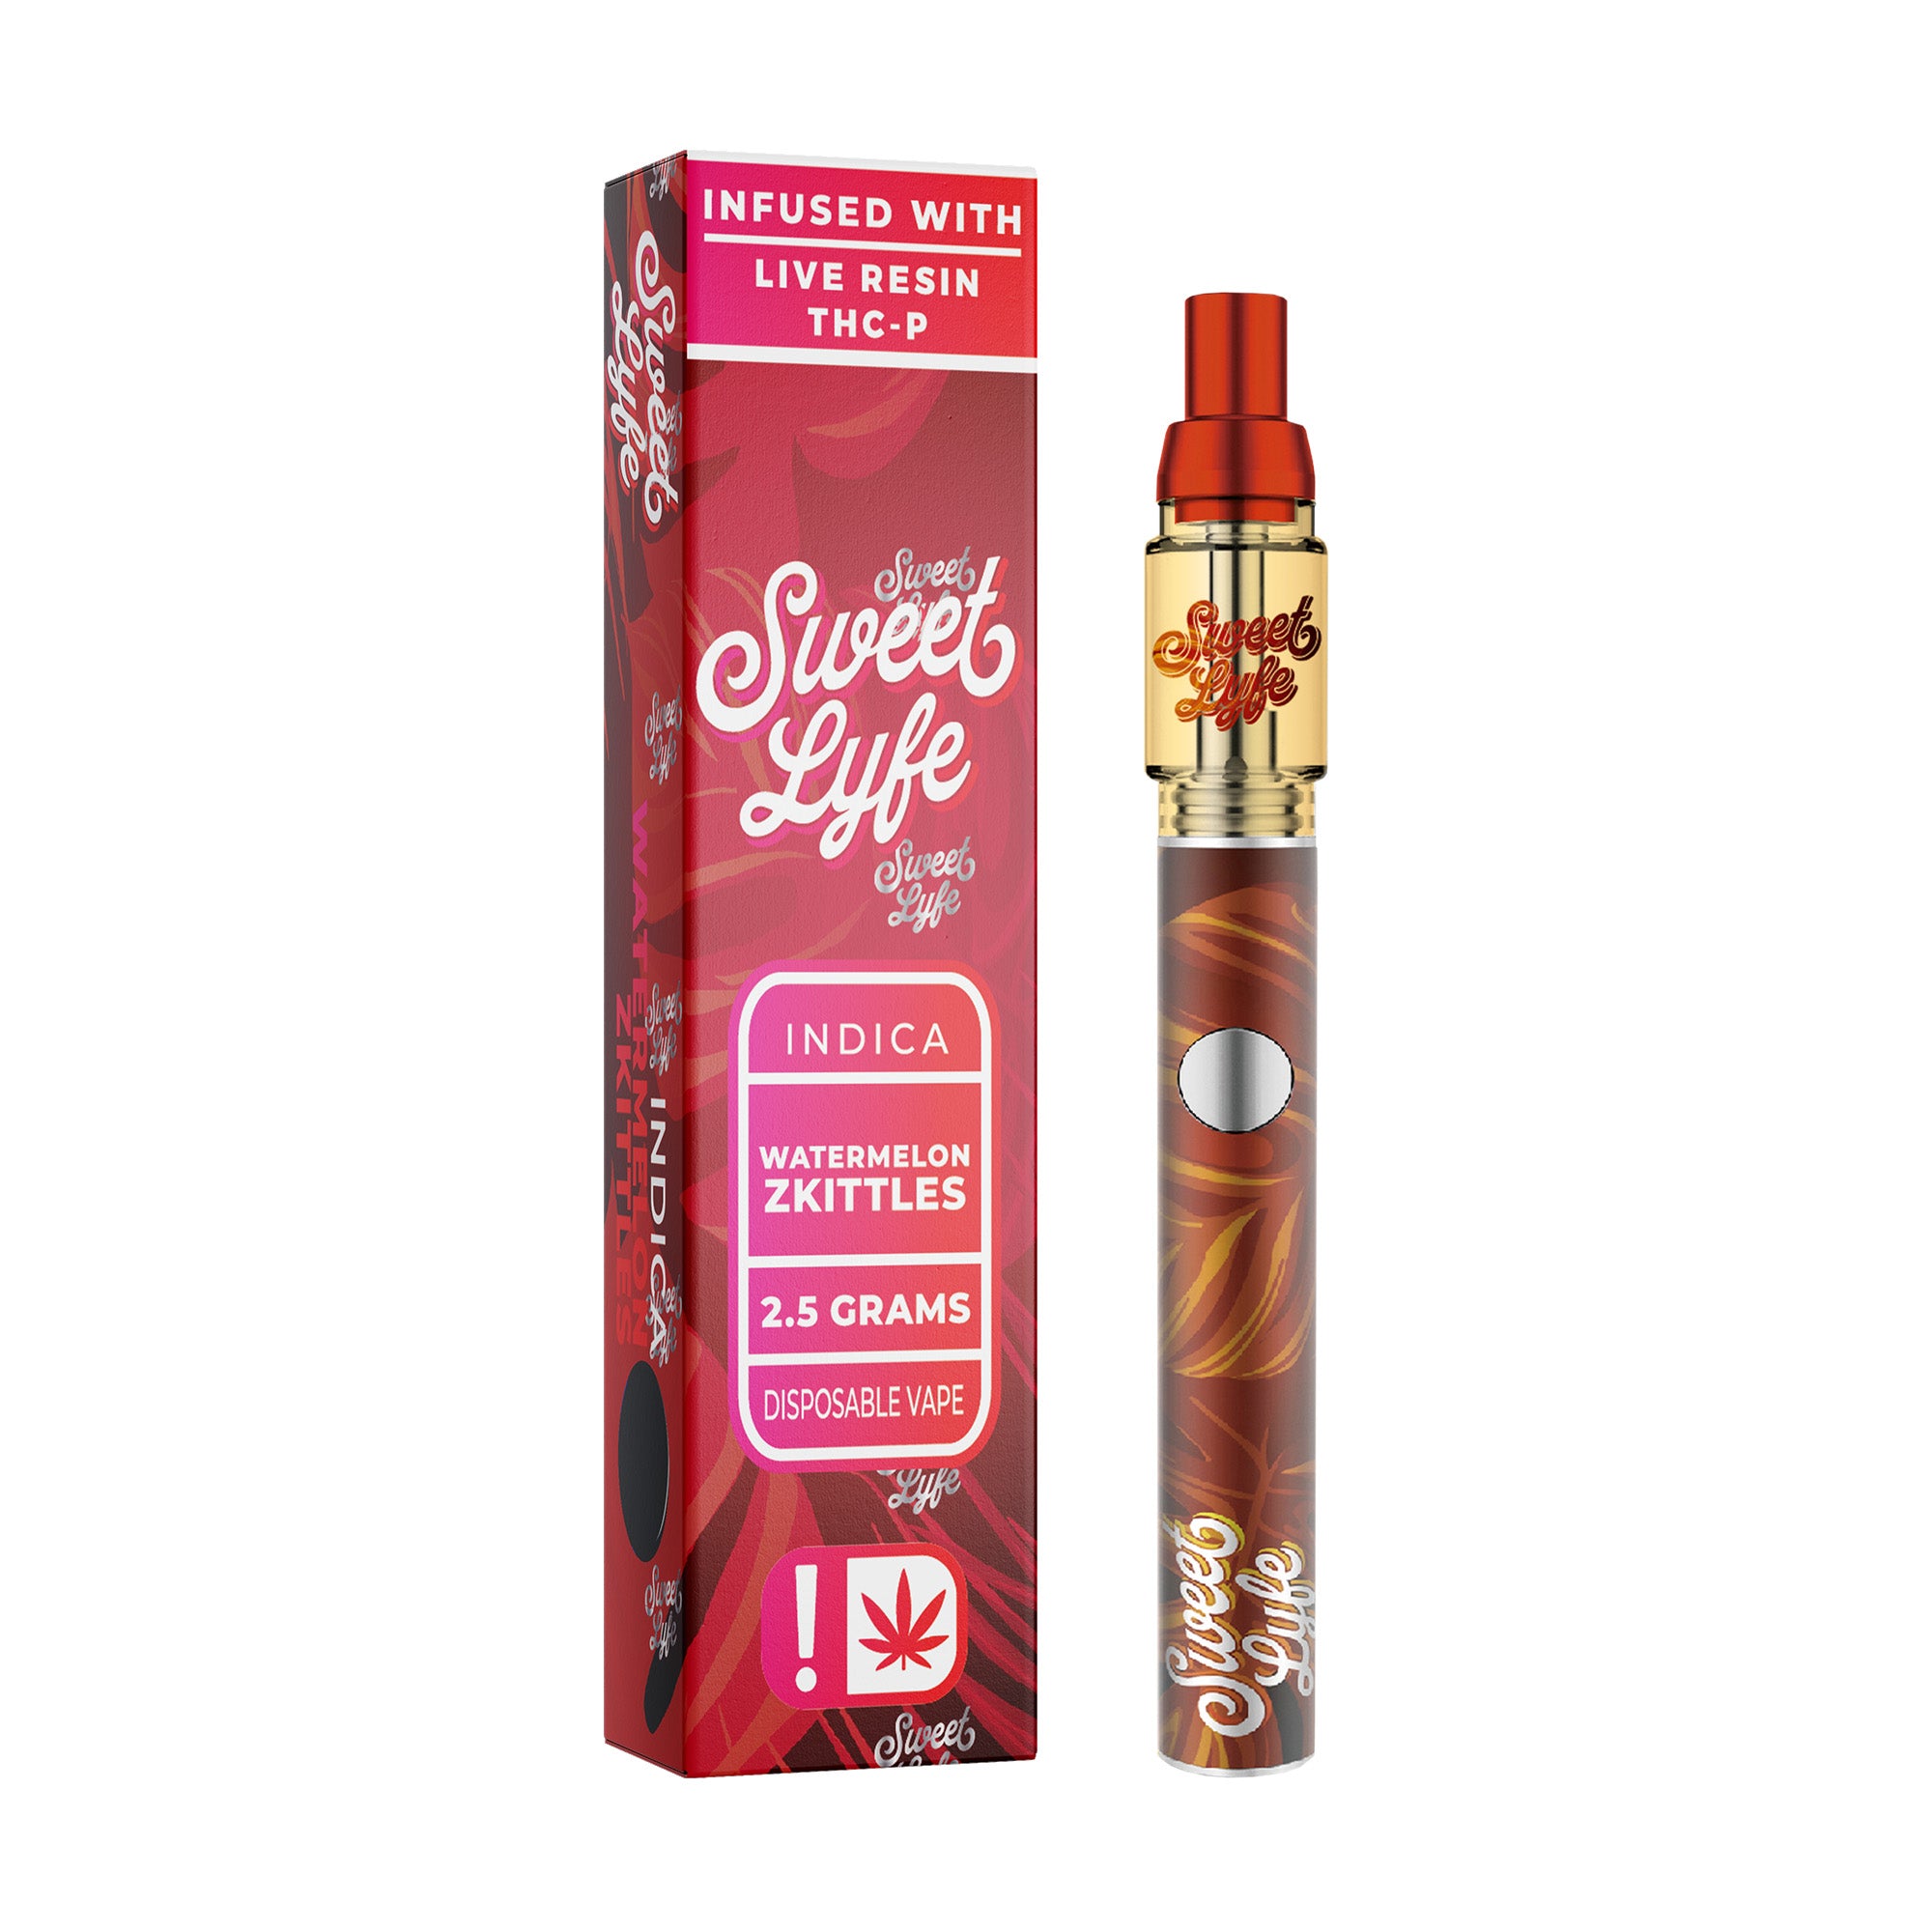 Disposable Vape Pen 2.5ml Infused with Live Resin Delta-8 + THCP - Watermelon Zkittles - Indica